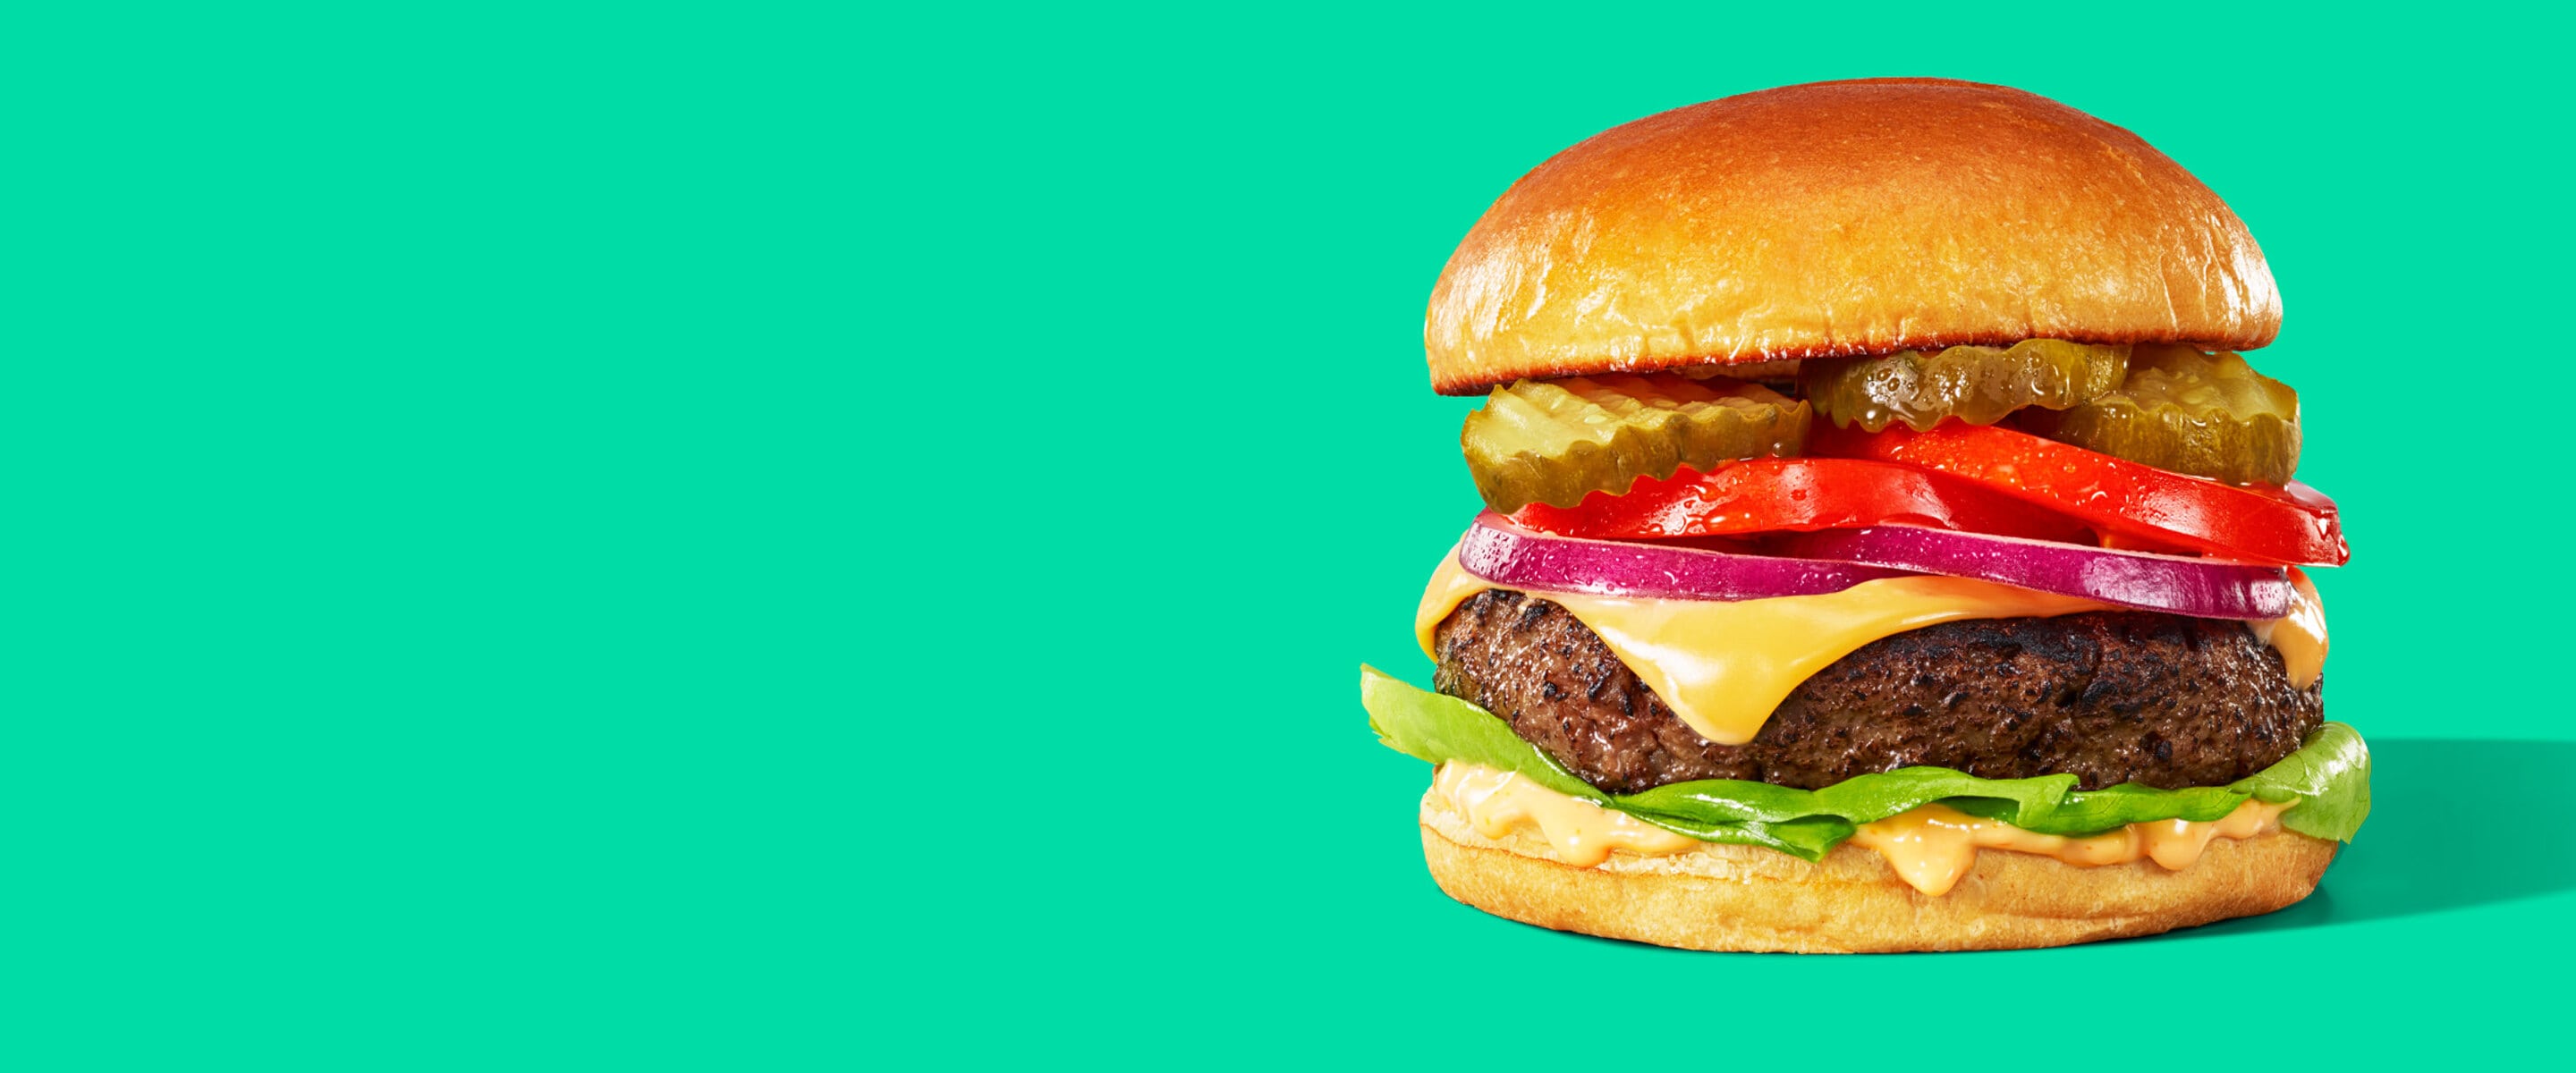 Eat an Impossible Burger—It's Good for Your Heart, Says AHA